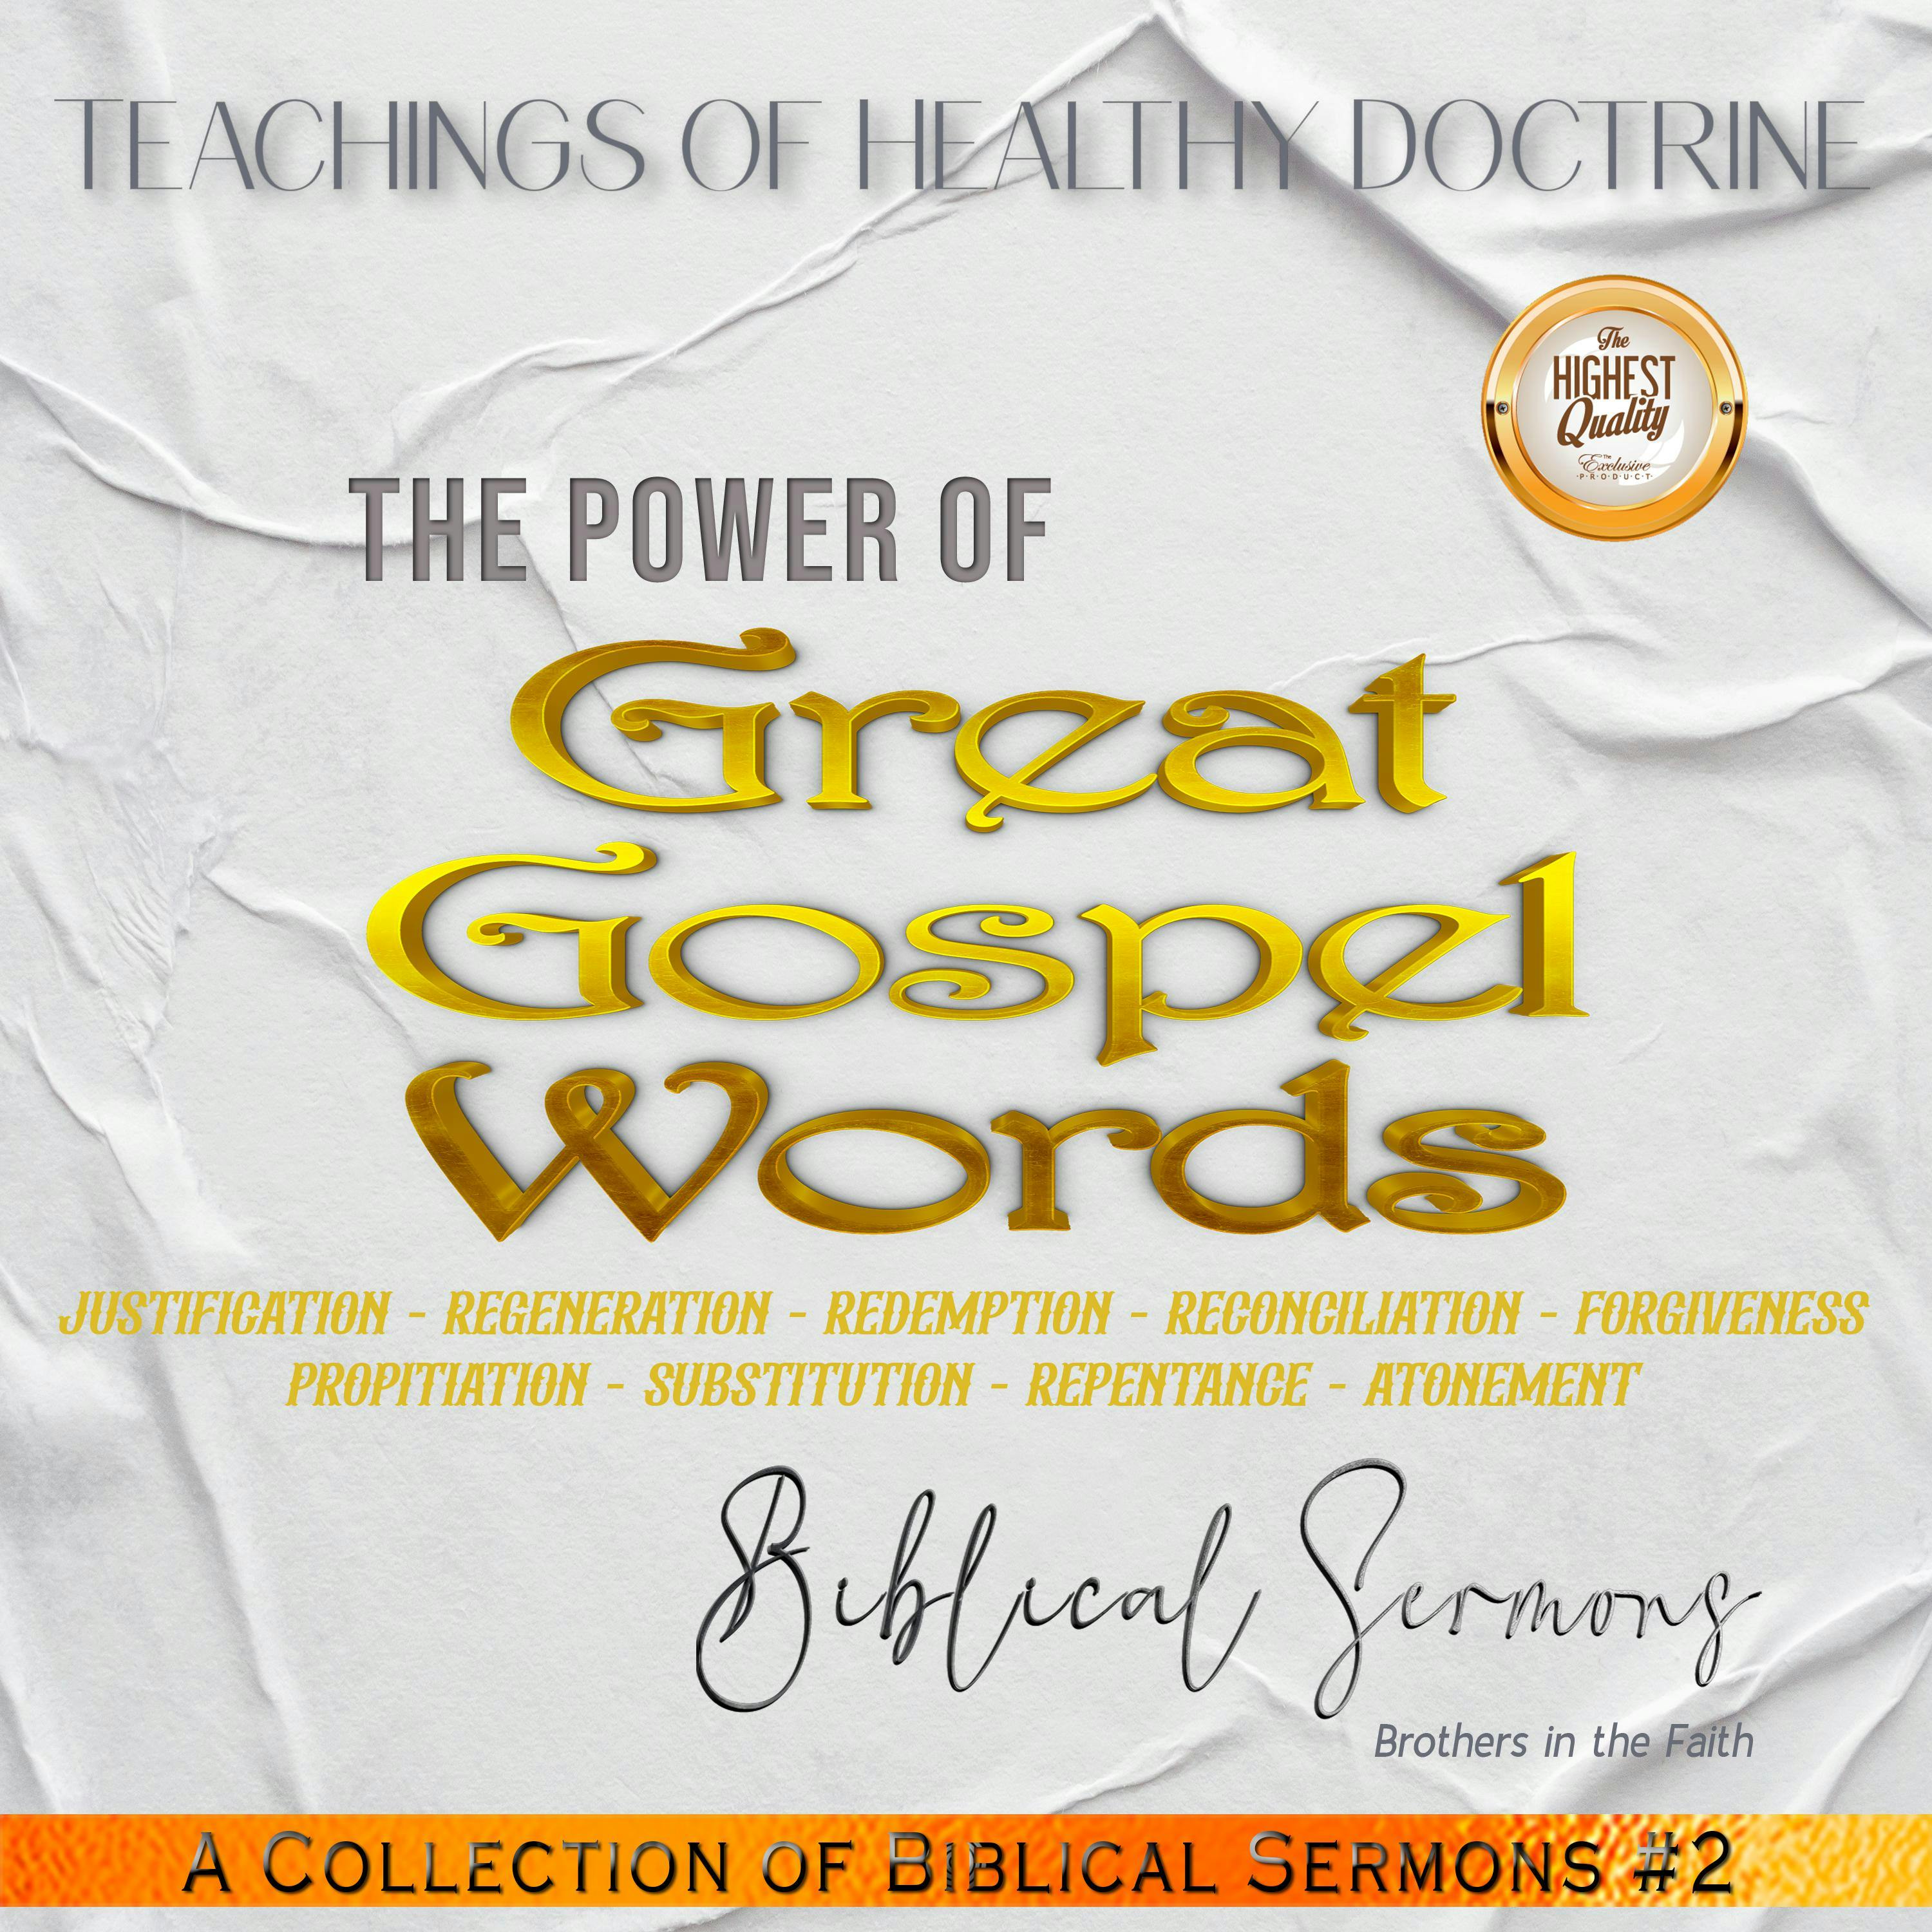 The Power of Great Gospel Words: Justification - Regeneration - Redemption - Reconciliation - Forgiveness Propitiation - Substitution - Repentance - Atonement - undefined